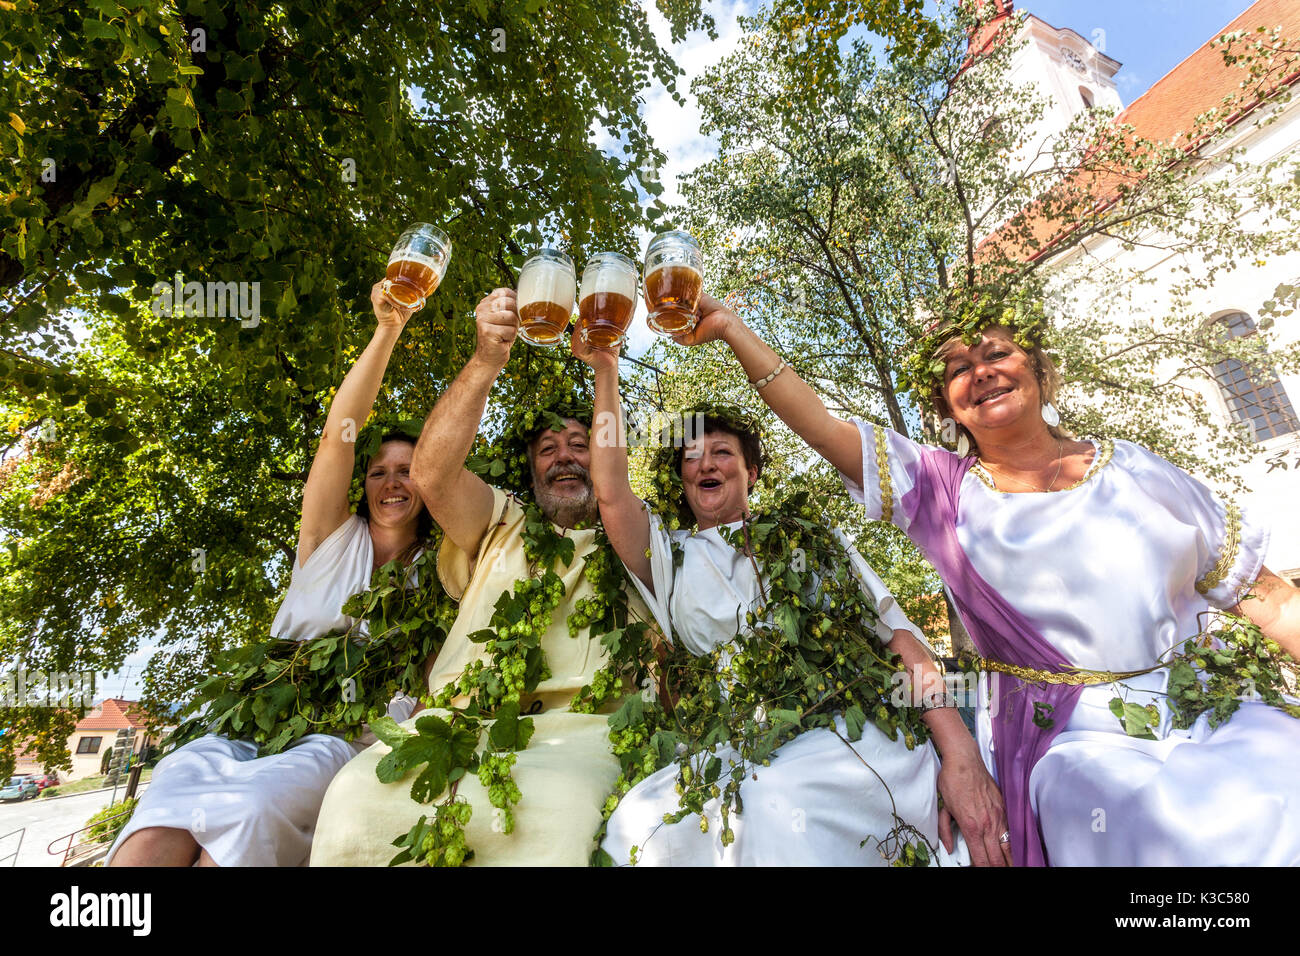 People dressed up as gods and the goddess of hops, visited and opened the Czech beer festival, Jevisovice, Czech Republic festival of beer Stock Photo